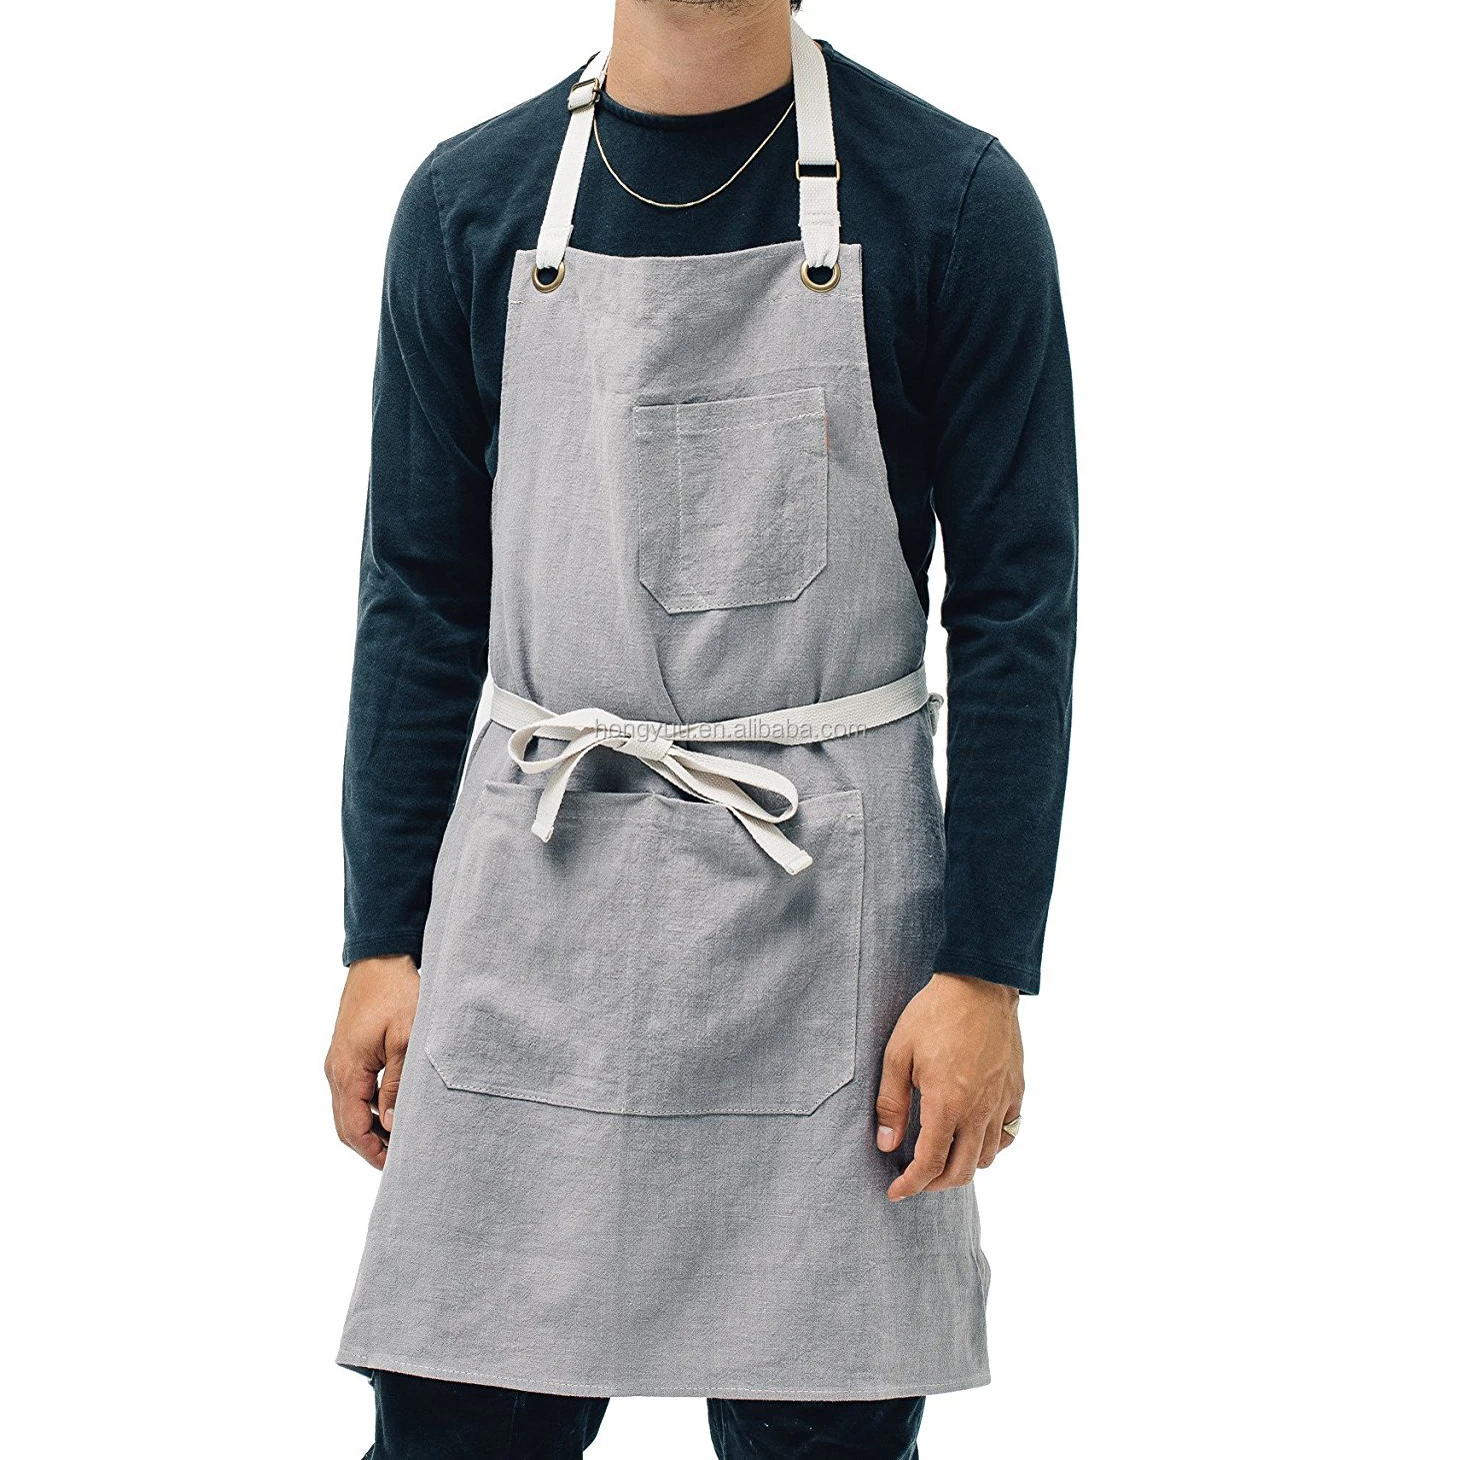 aprons for workers.